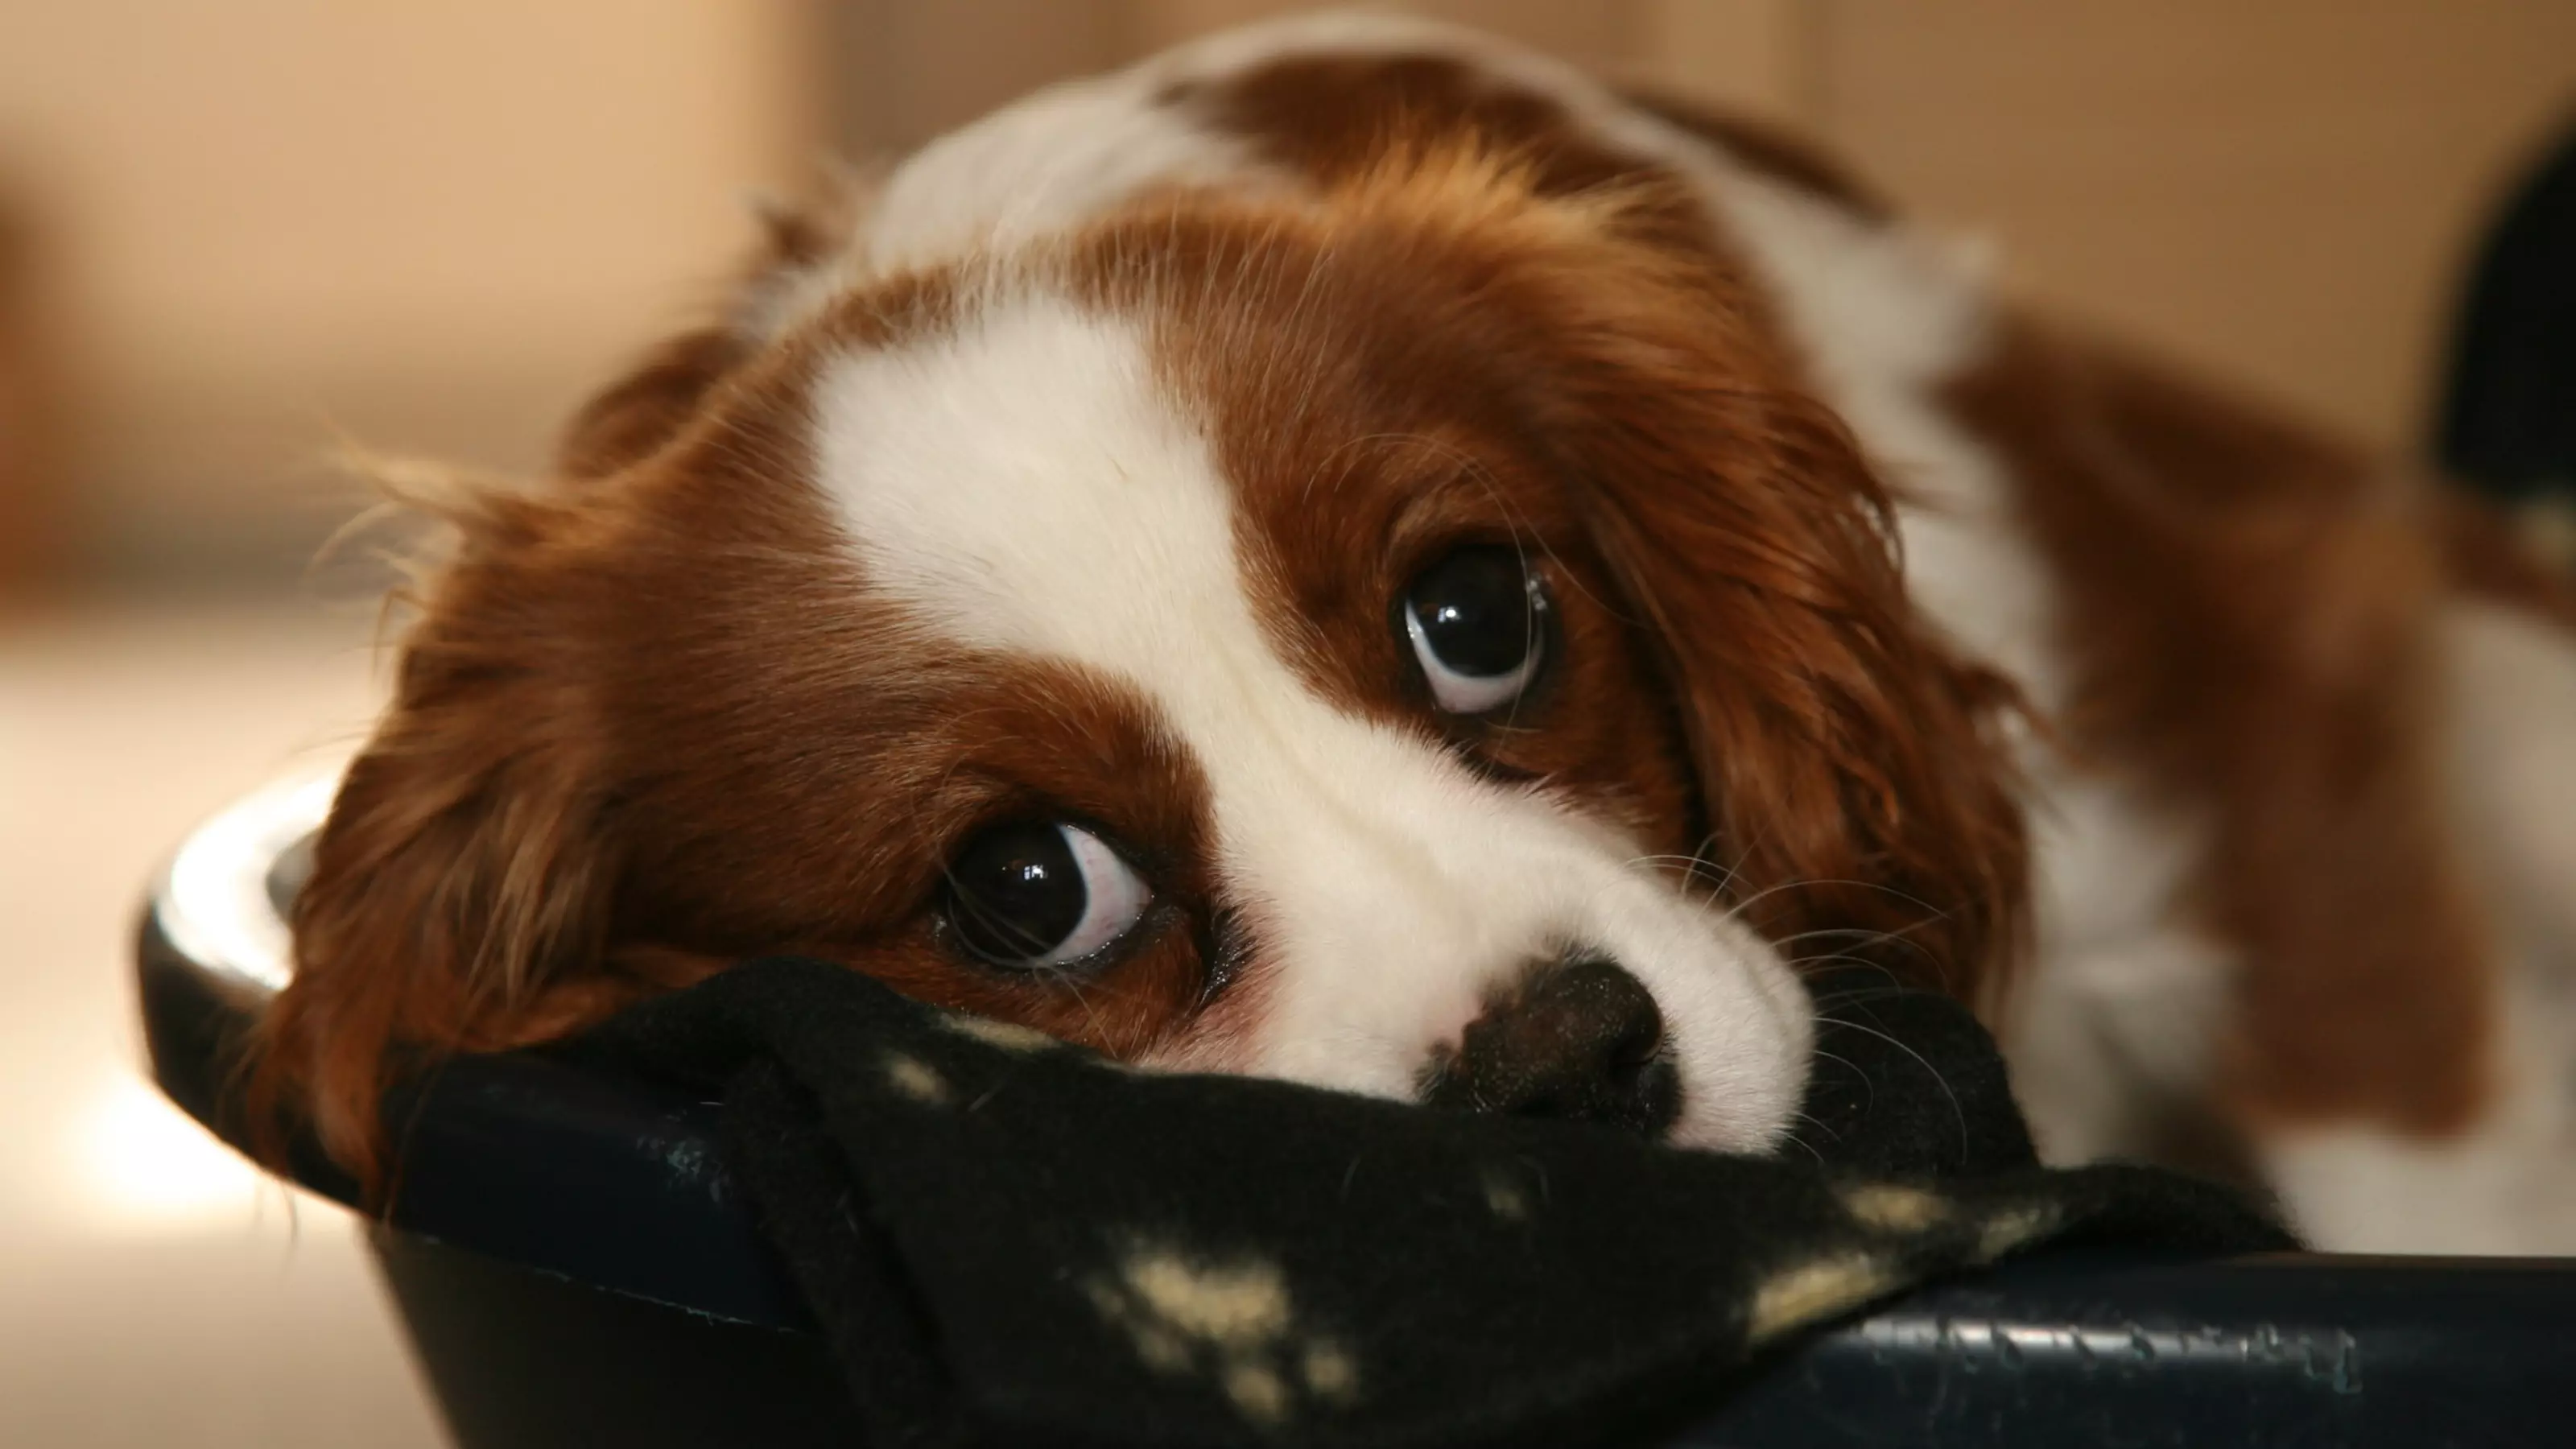 Max, a six-month-old King Charles spaniel belonging to Tony Goodchild